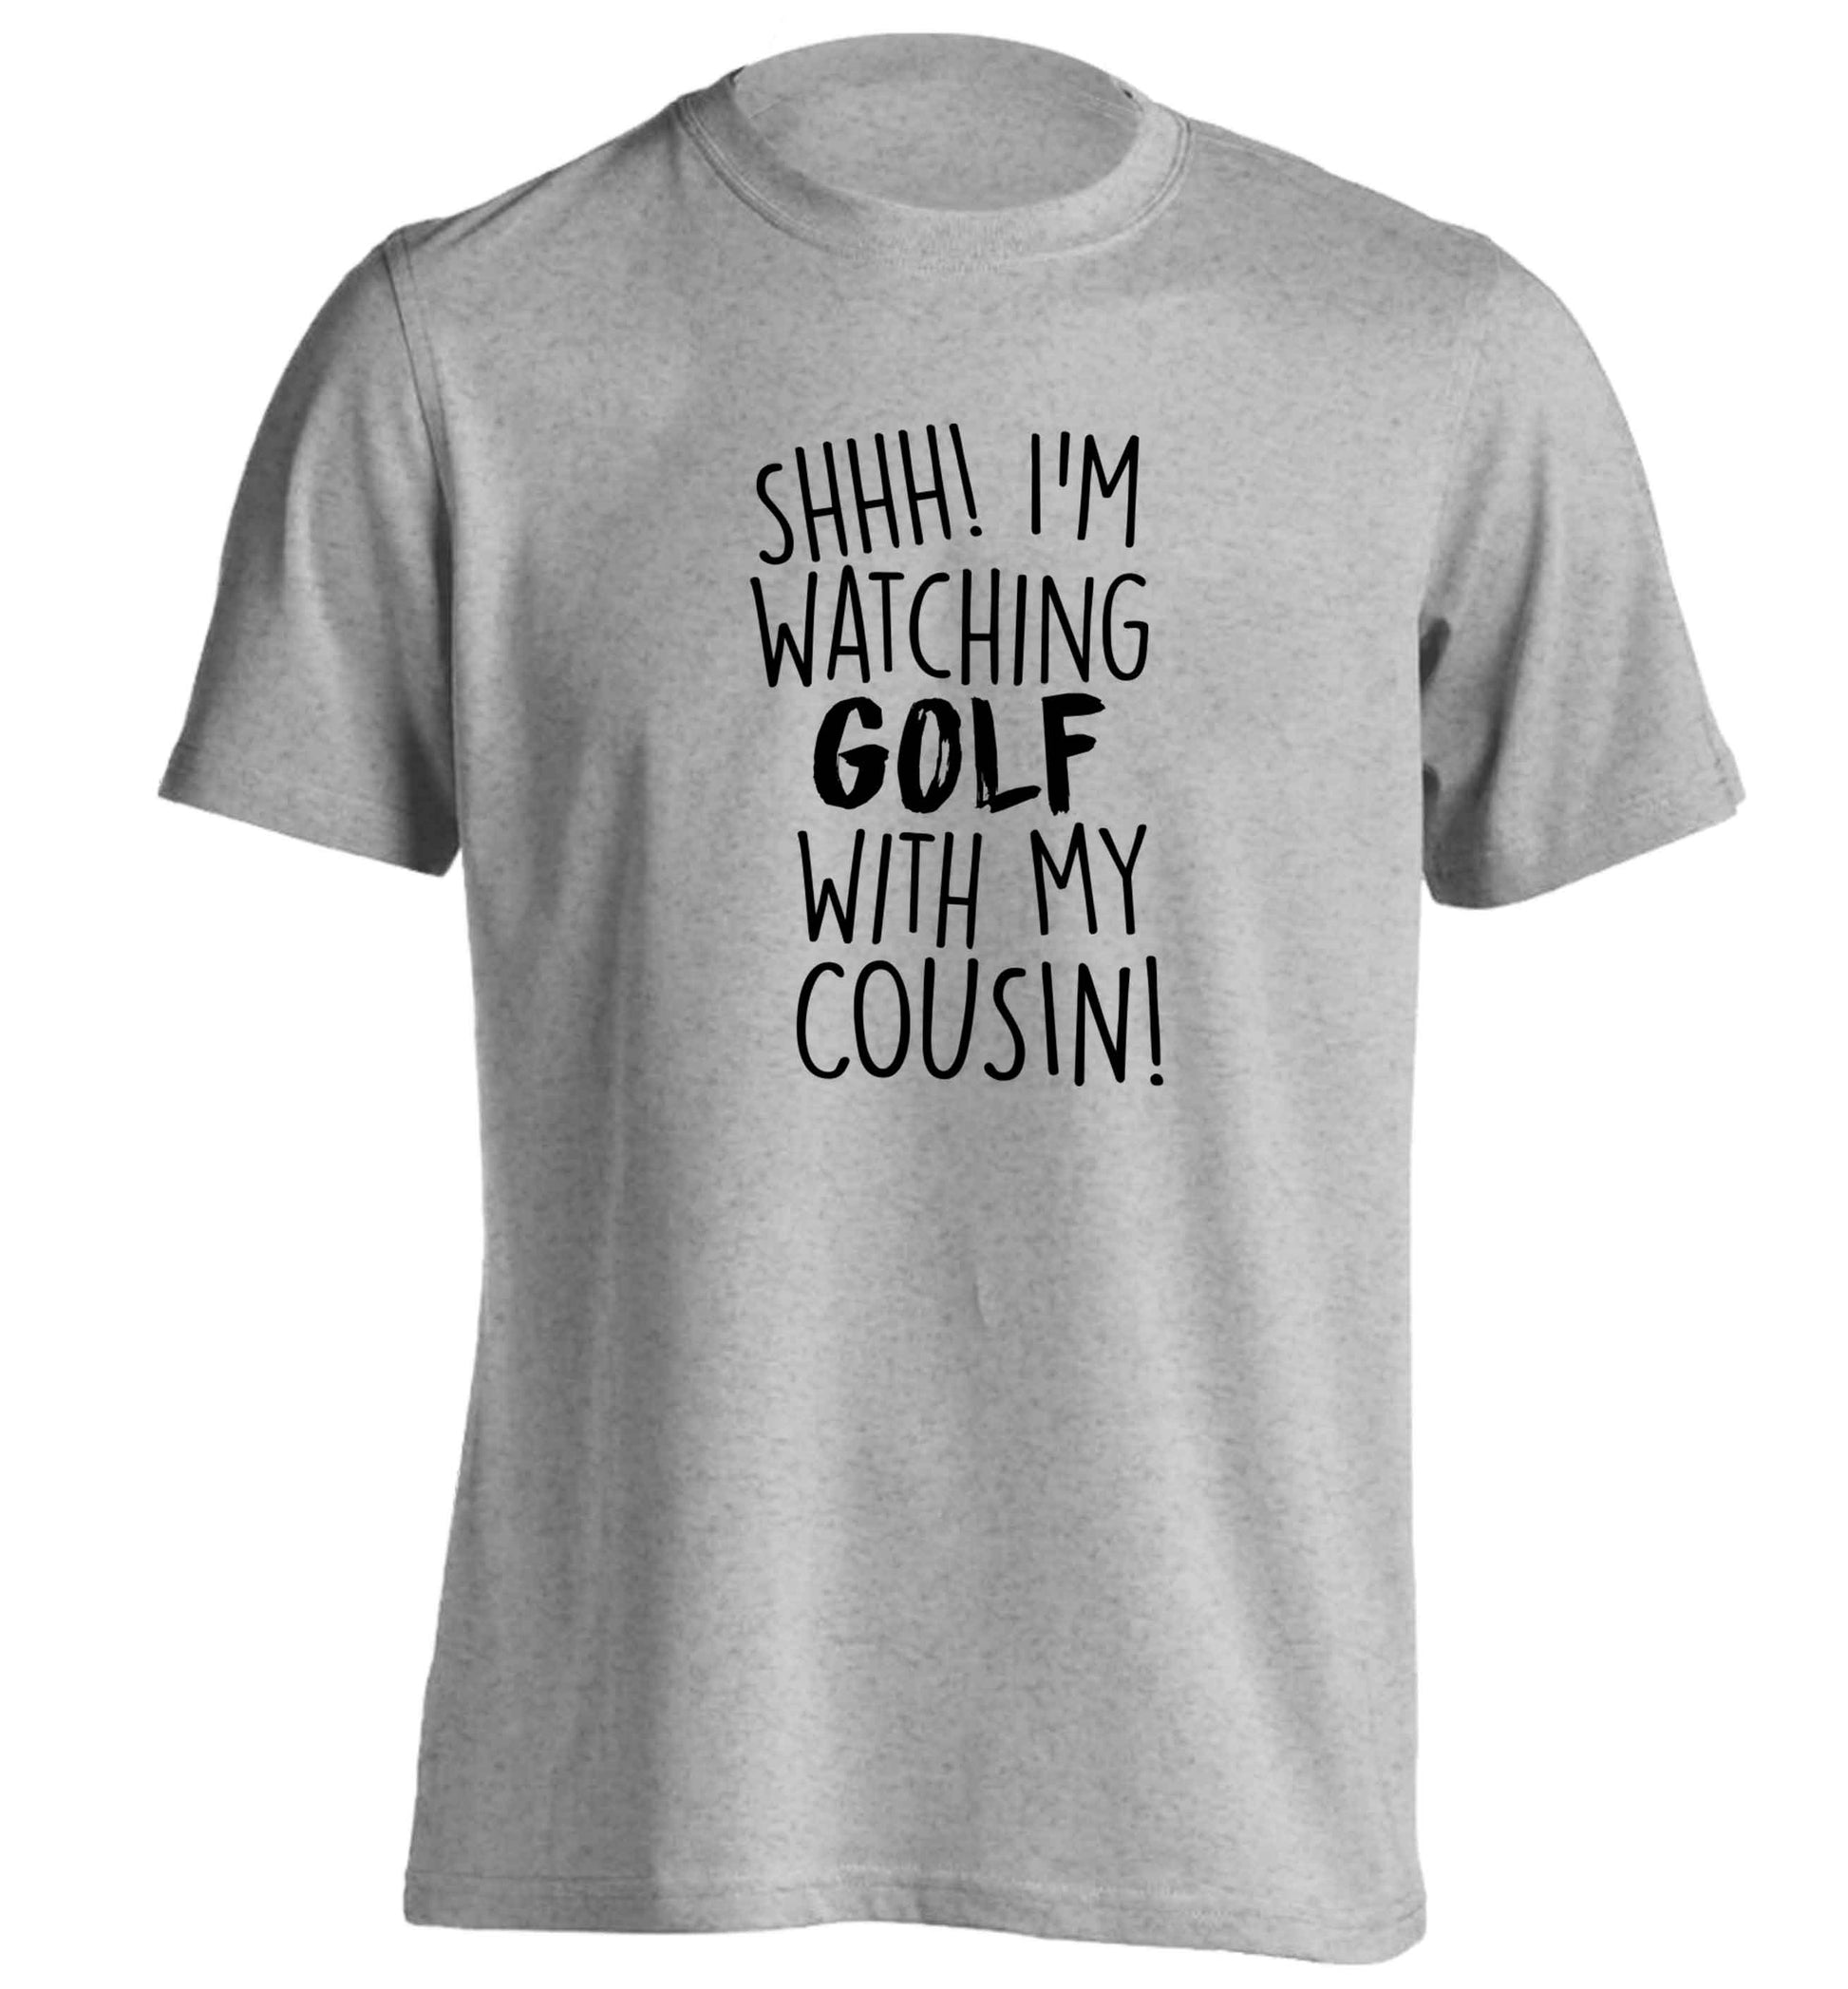 Shh I'm watching golf with my cousin adults unisex grey Tshirt 2XL